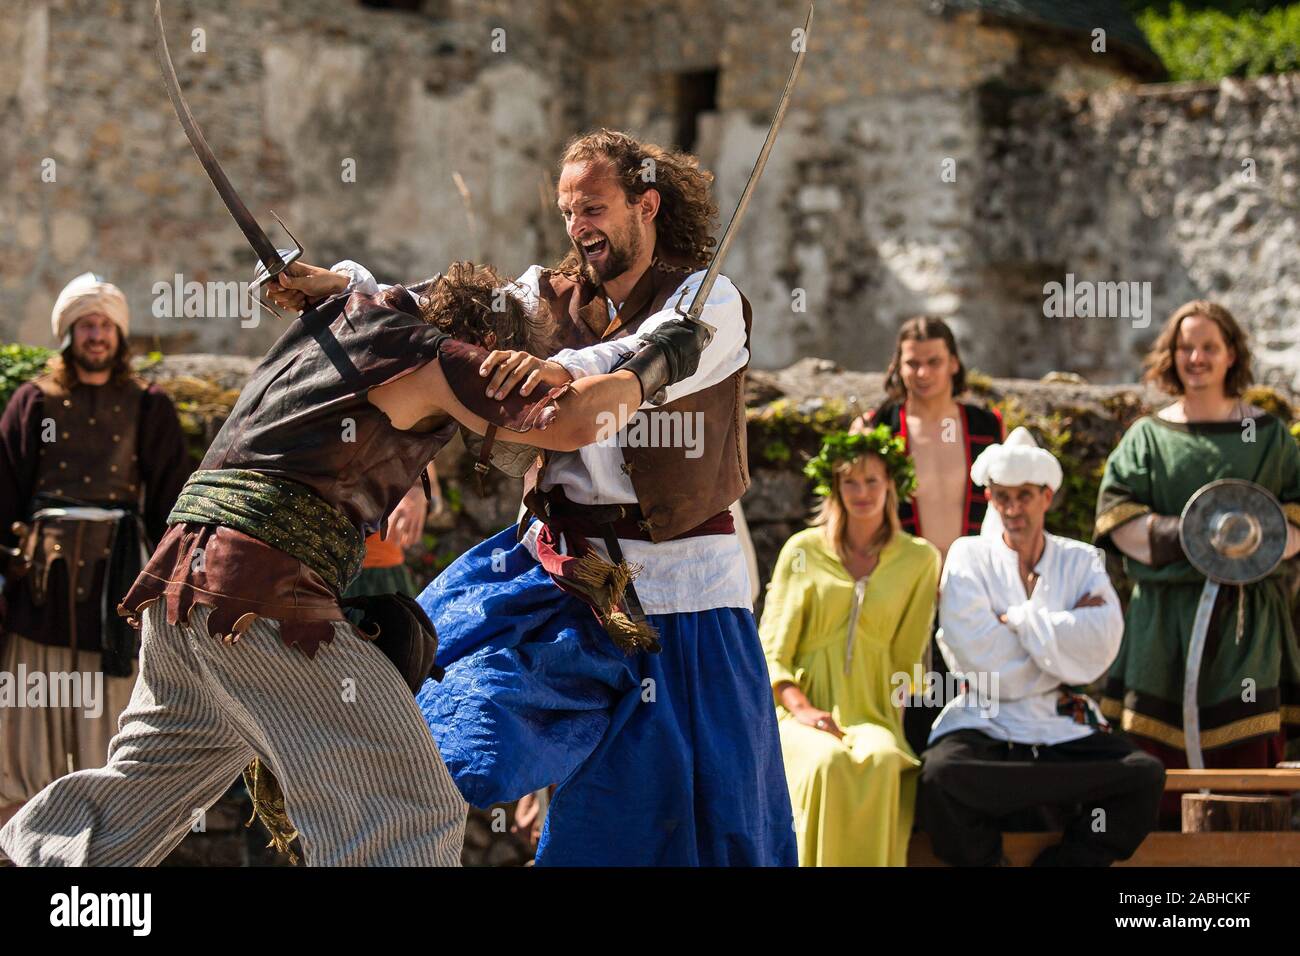 Žiče, Slovenia, July 22, 2007: Ottoman wariors fight in a duel during the Fiery Carthusia Medieval reenactment event in Žiče carthusian monastery, Slovenia, in 2007. Stock Photo